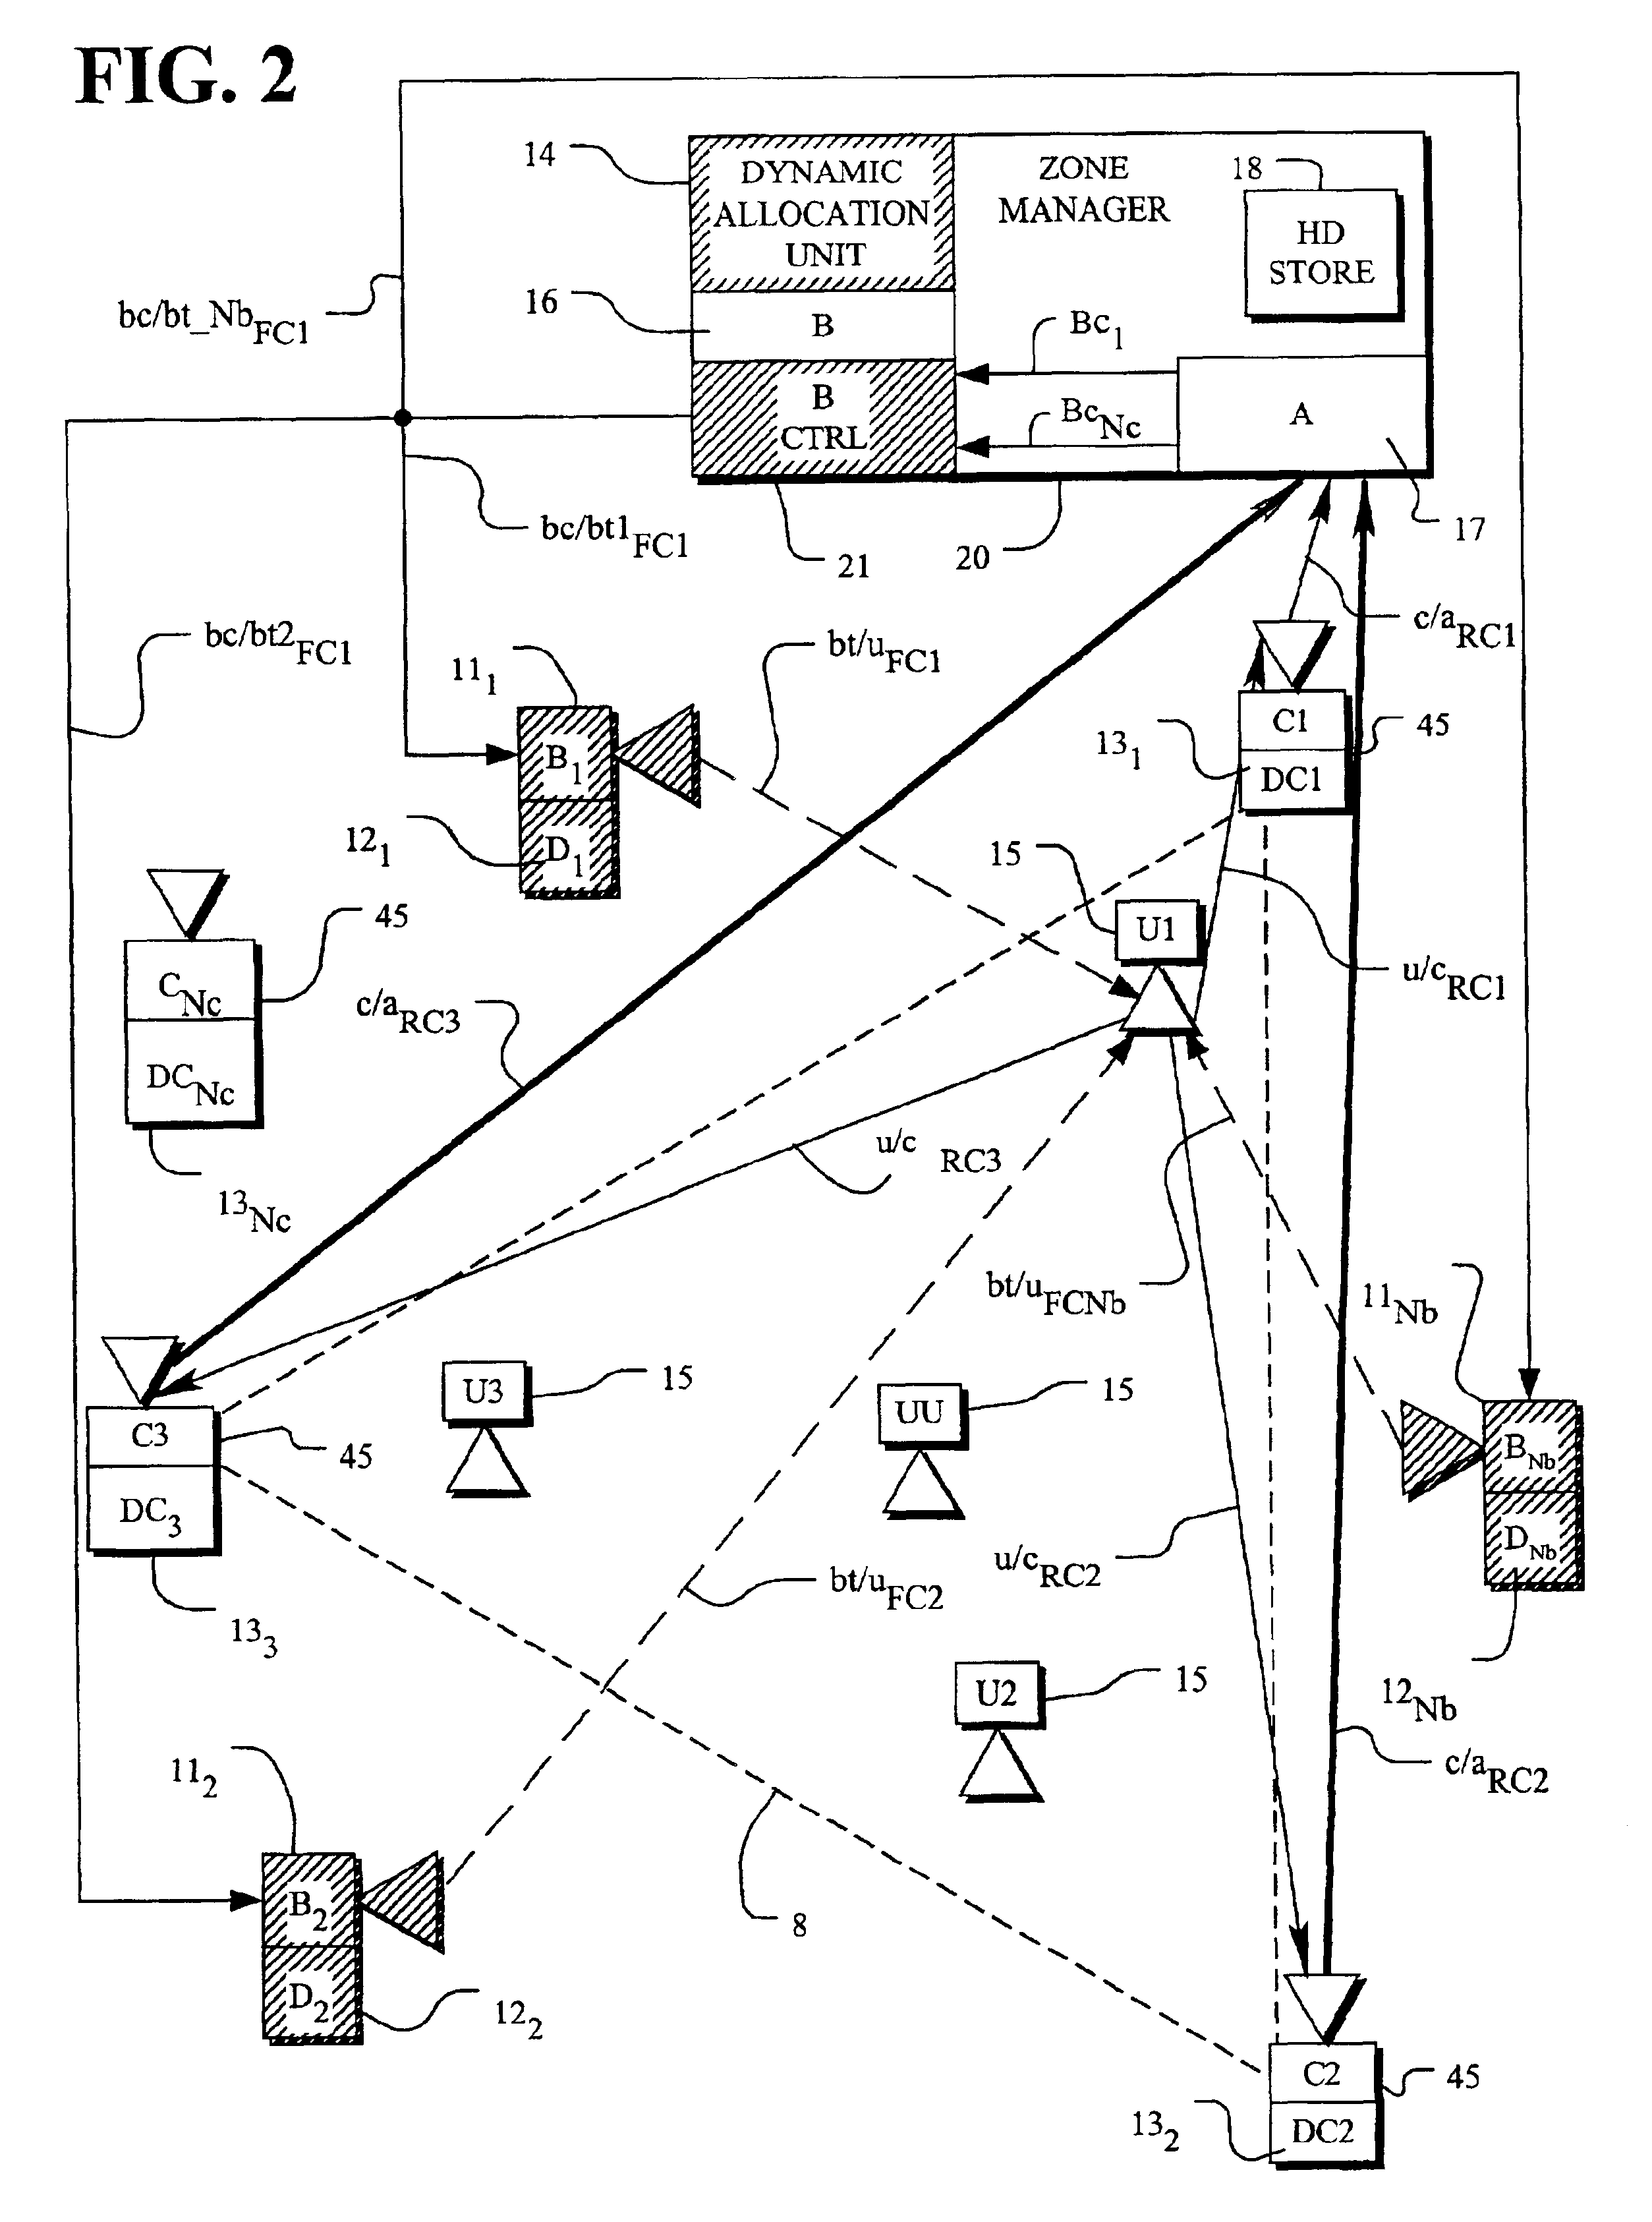 Dynamic channel allocation in multiple-access communication systems